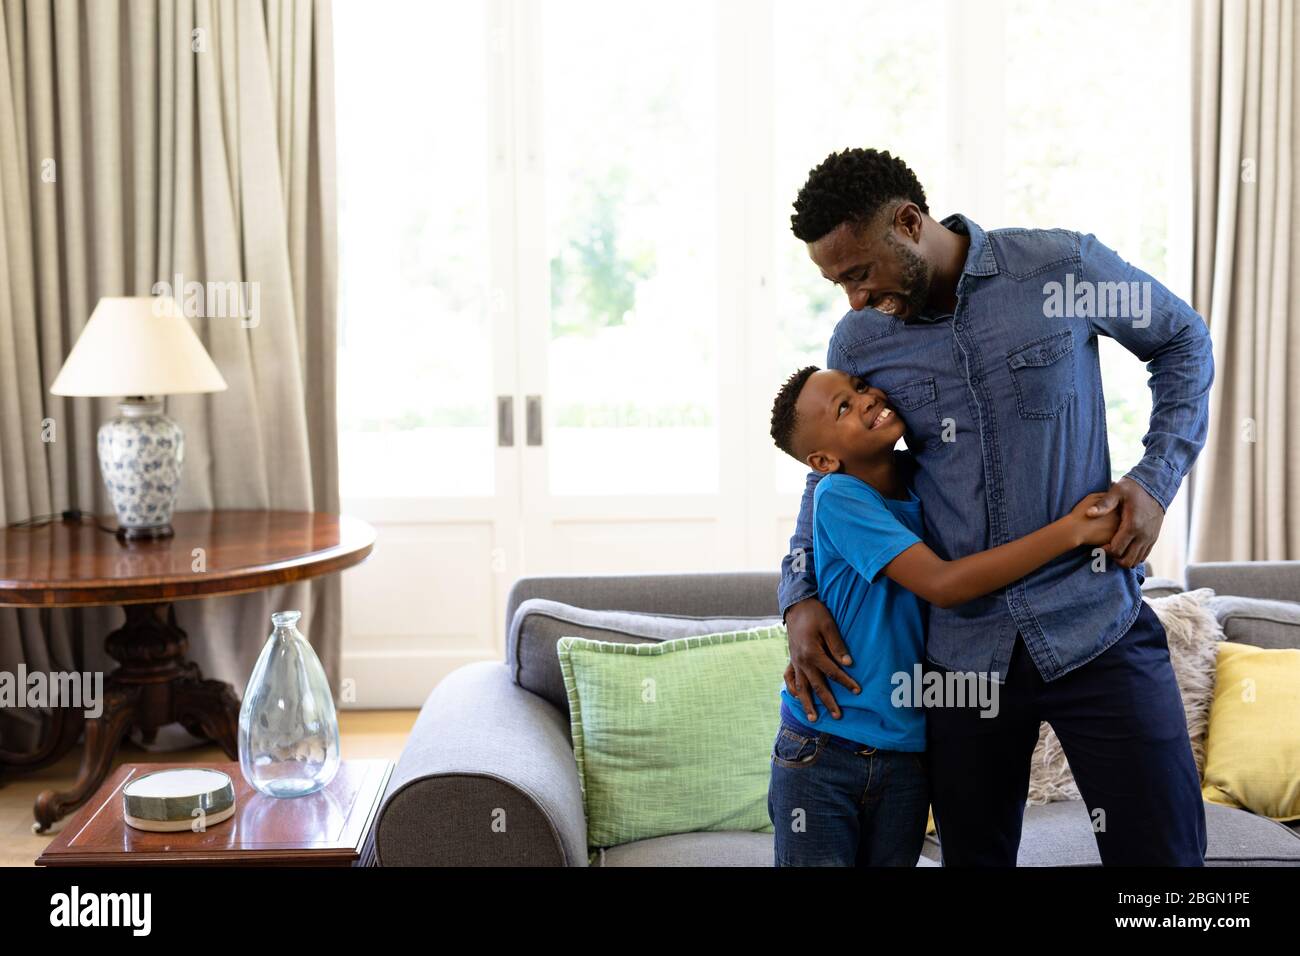 African American man enjoying his time at home With his son Stock Photo